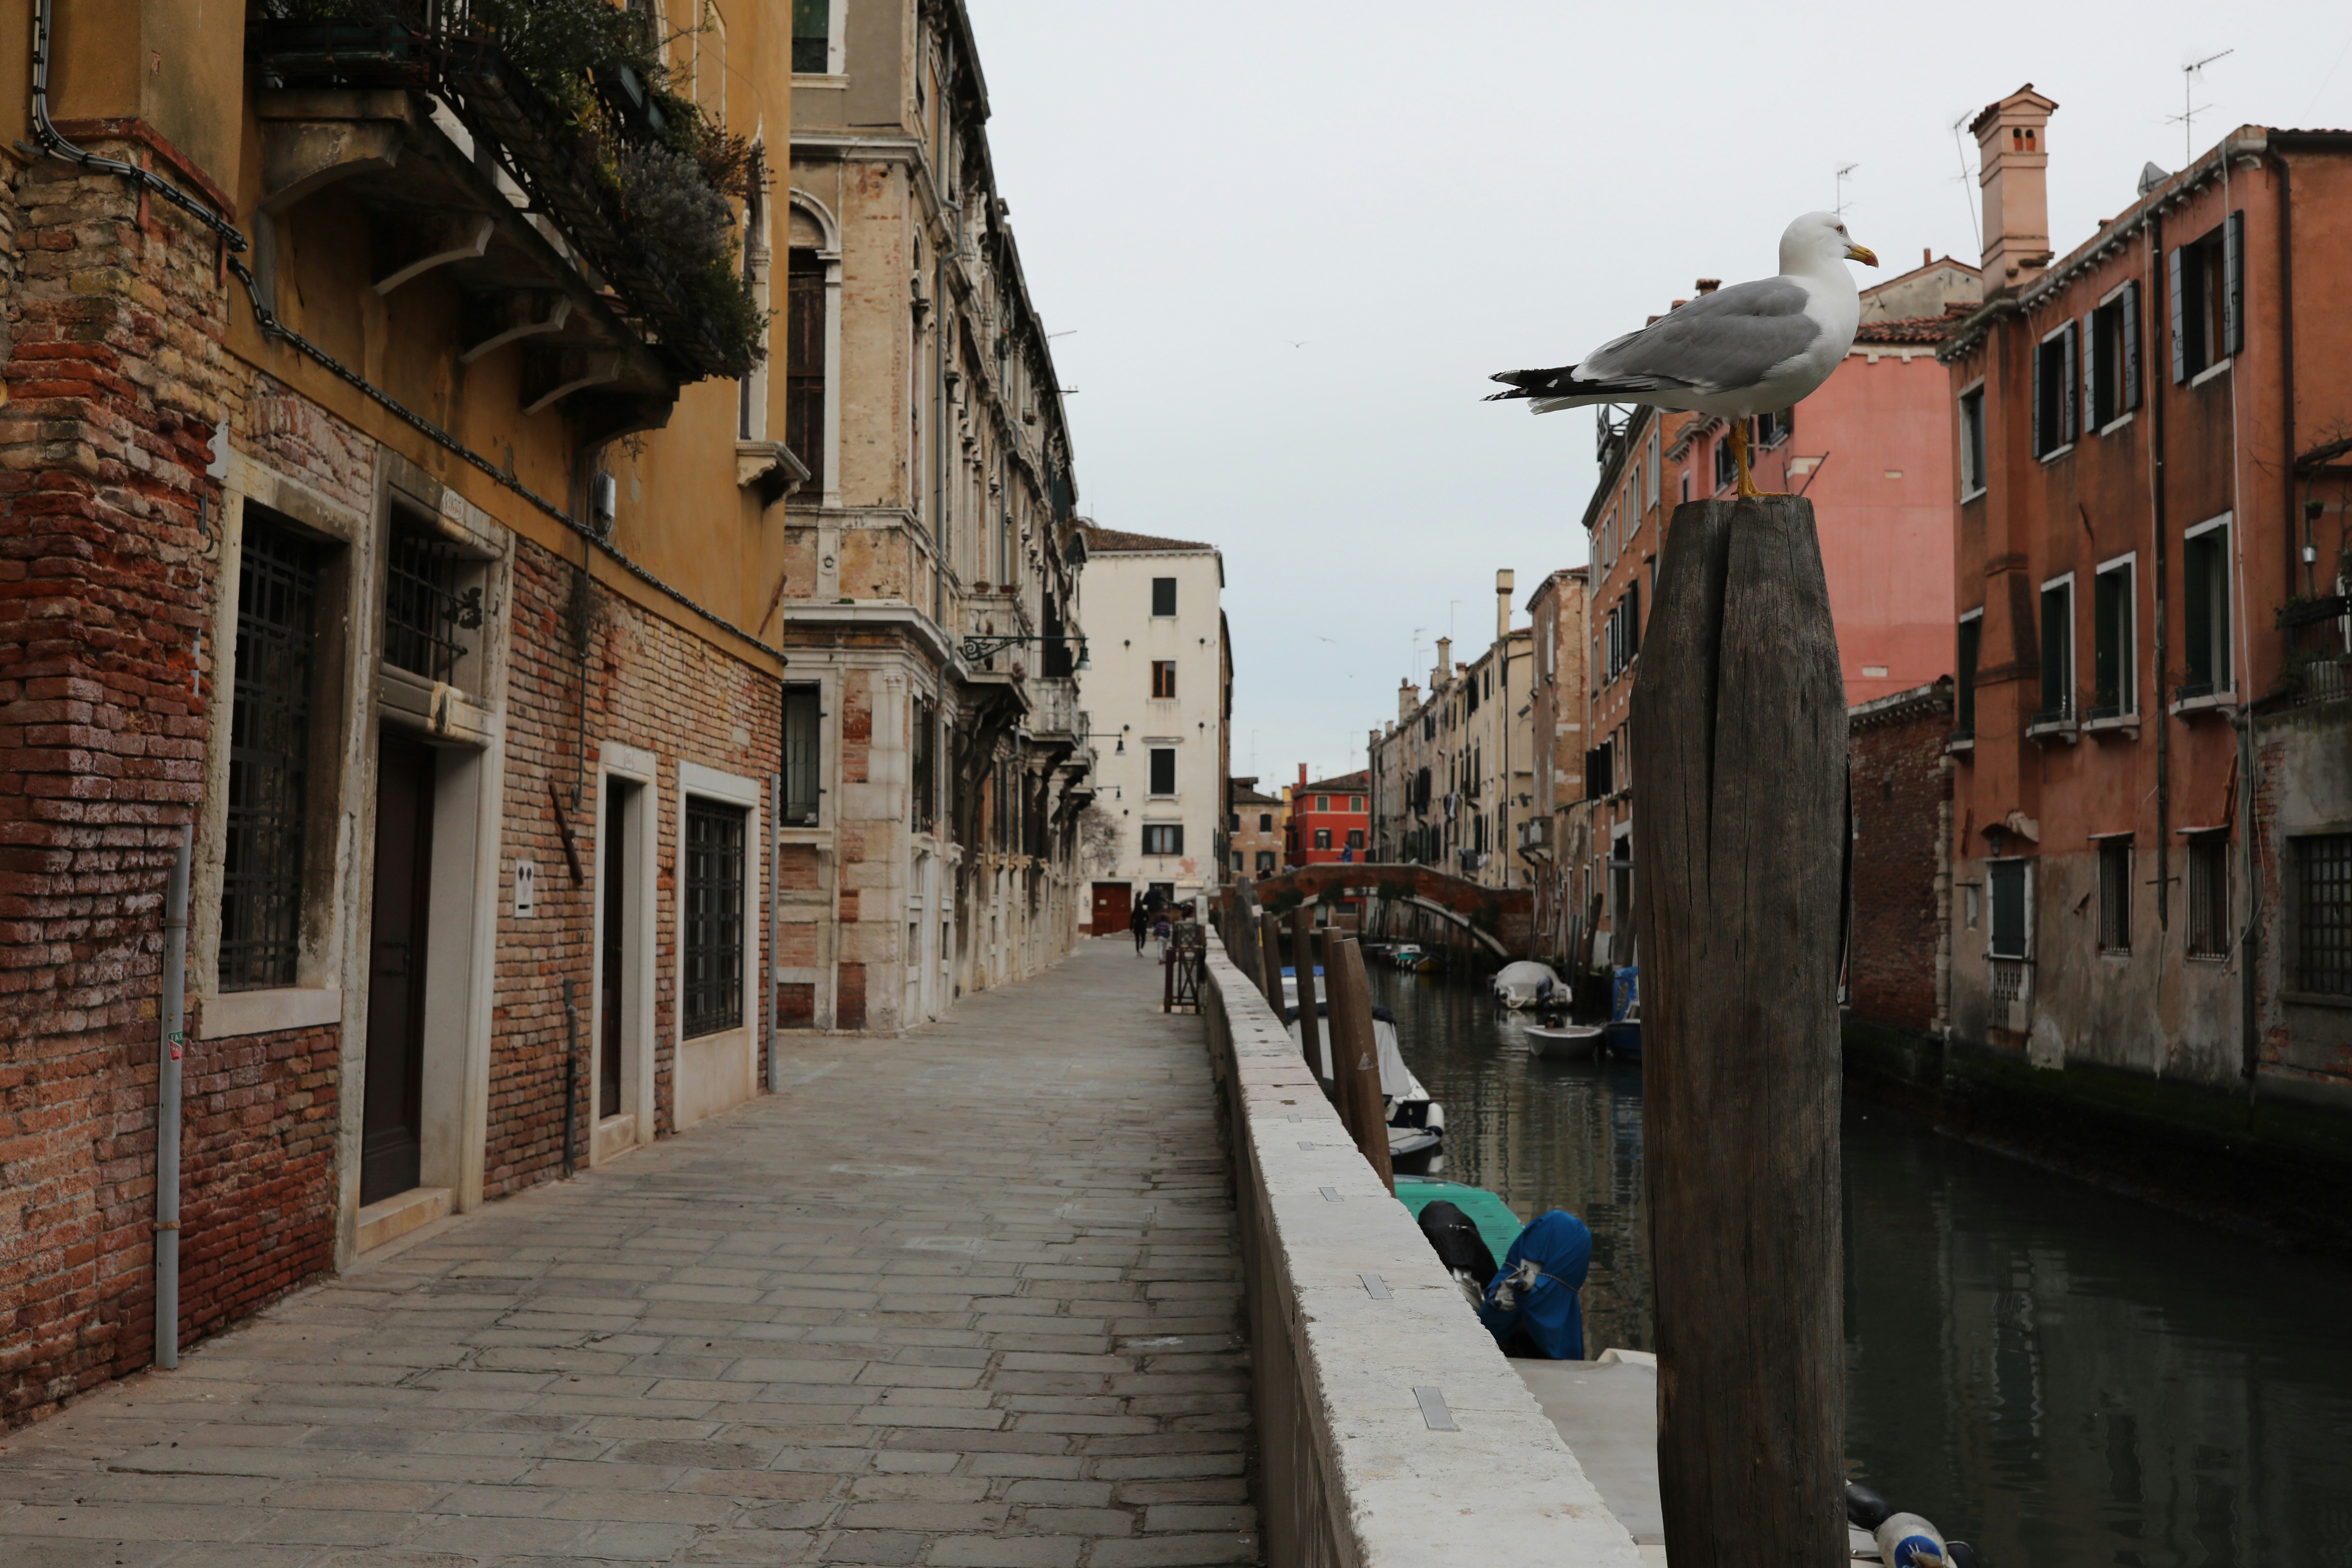 A seagull in one of Venice's deserted streets